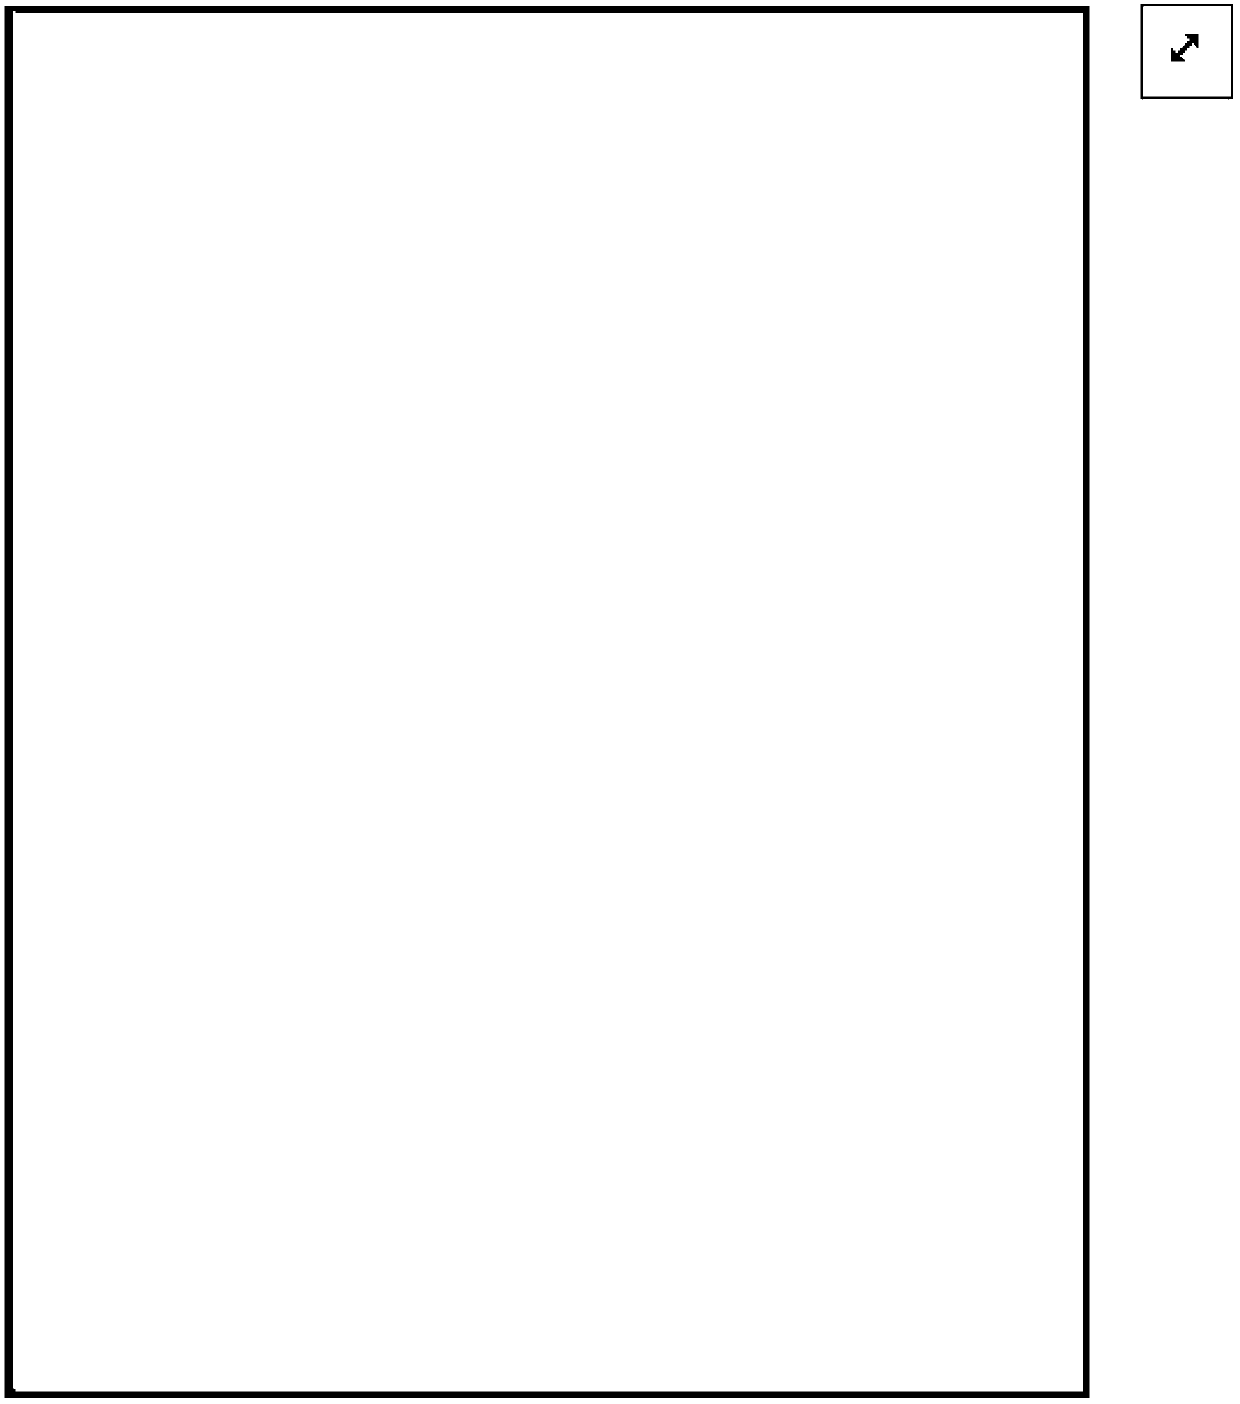 Full-screen picture browsing method and device for web page